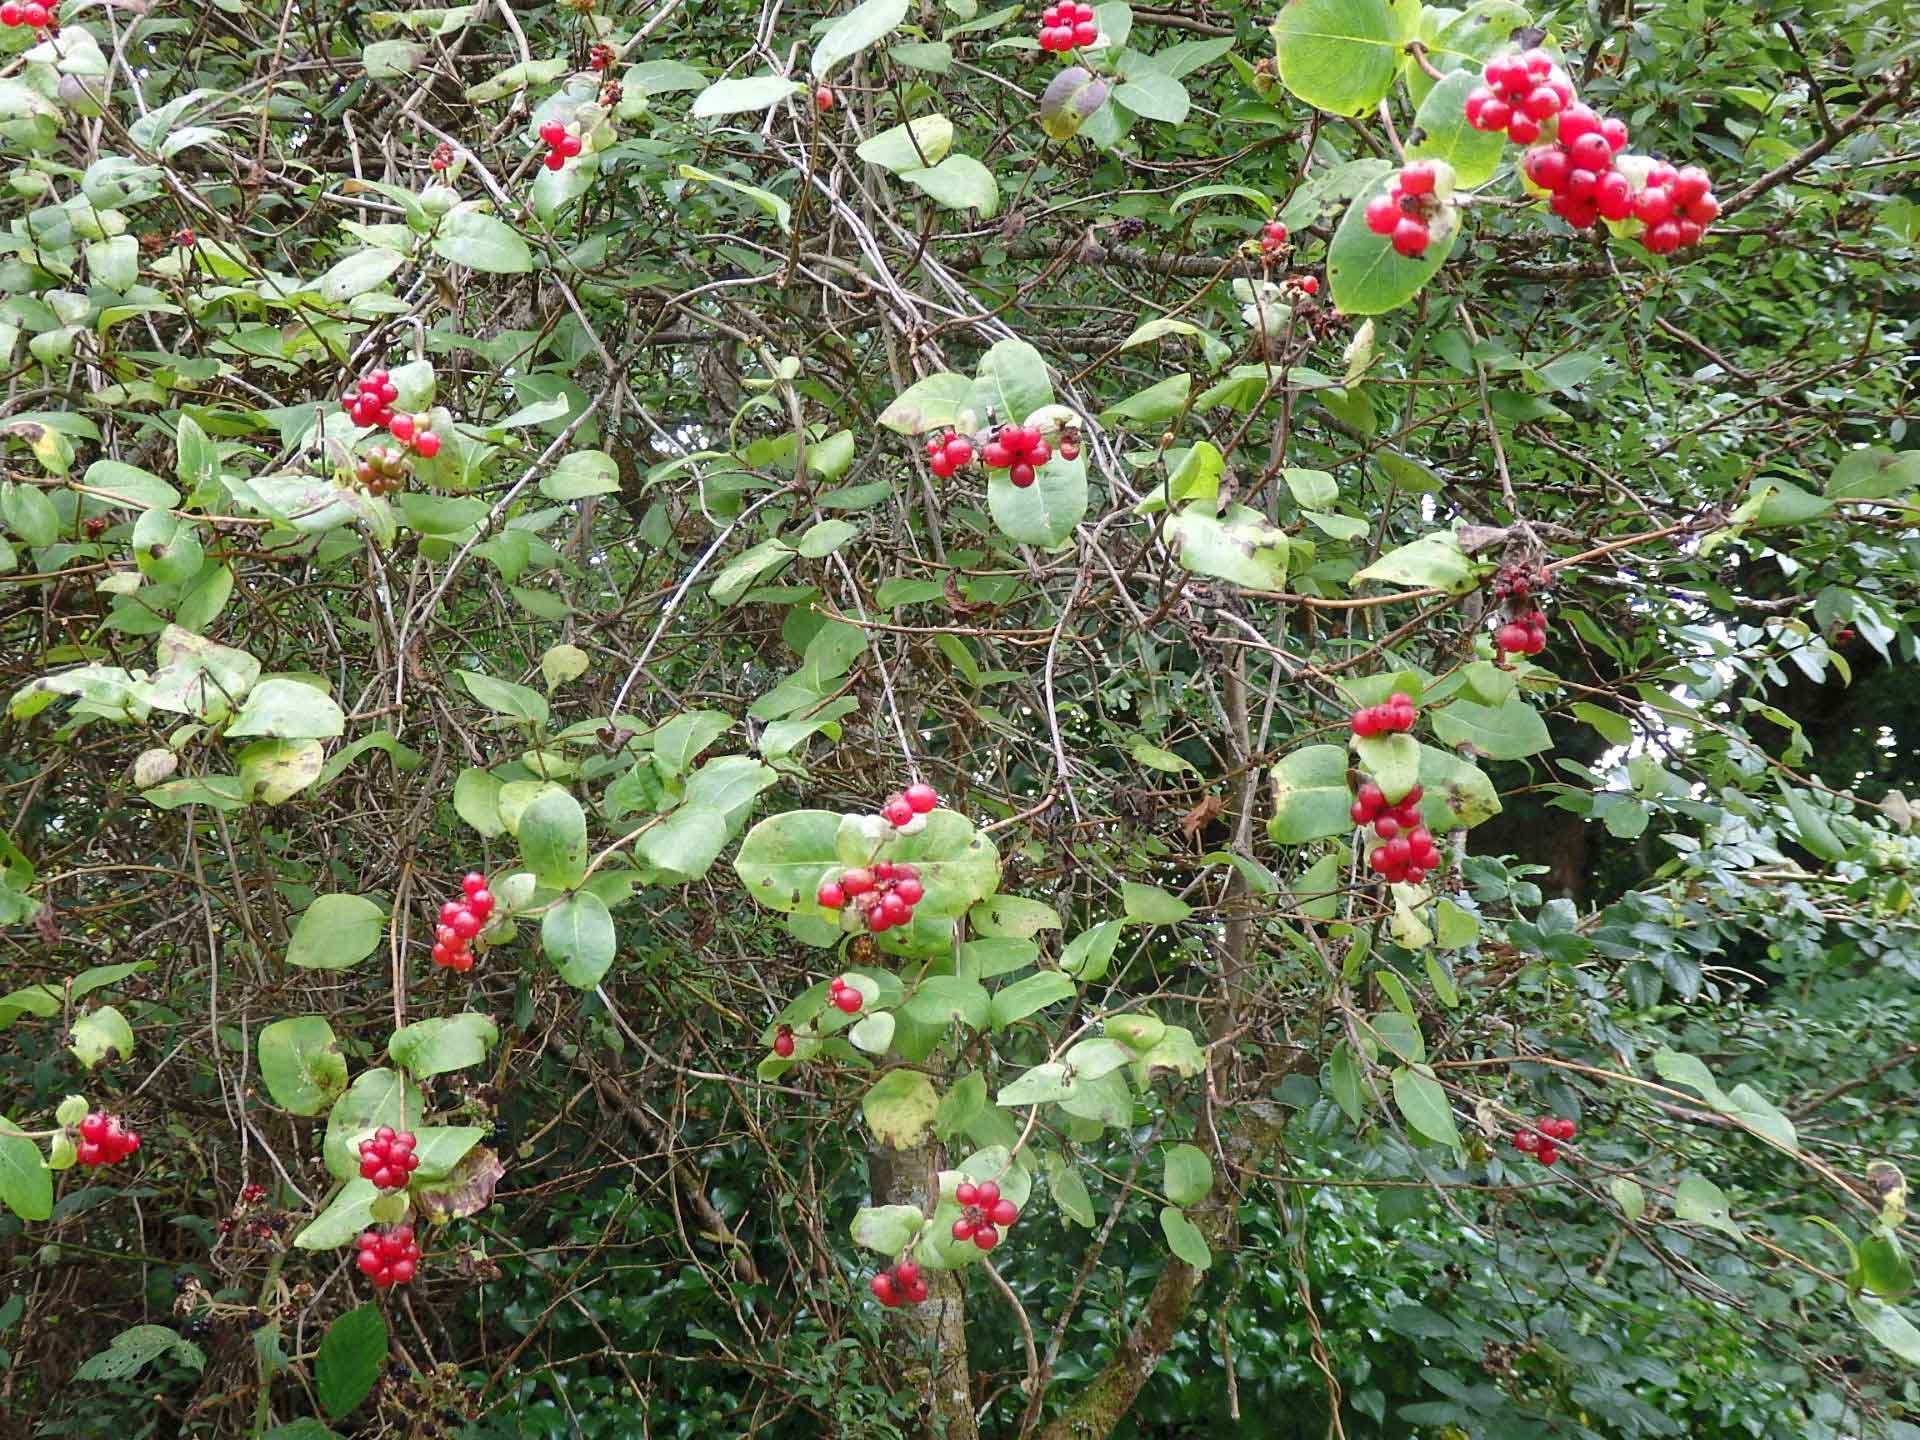 Black and red bryony berries